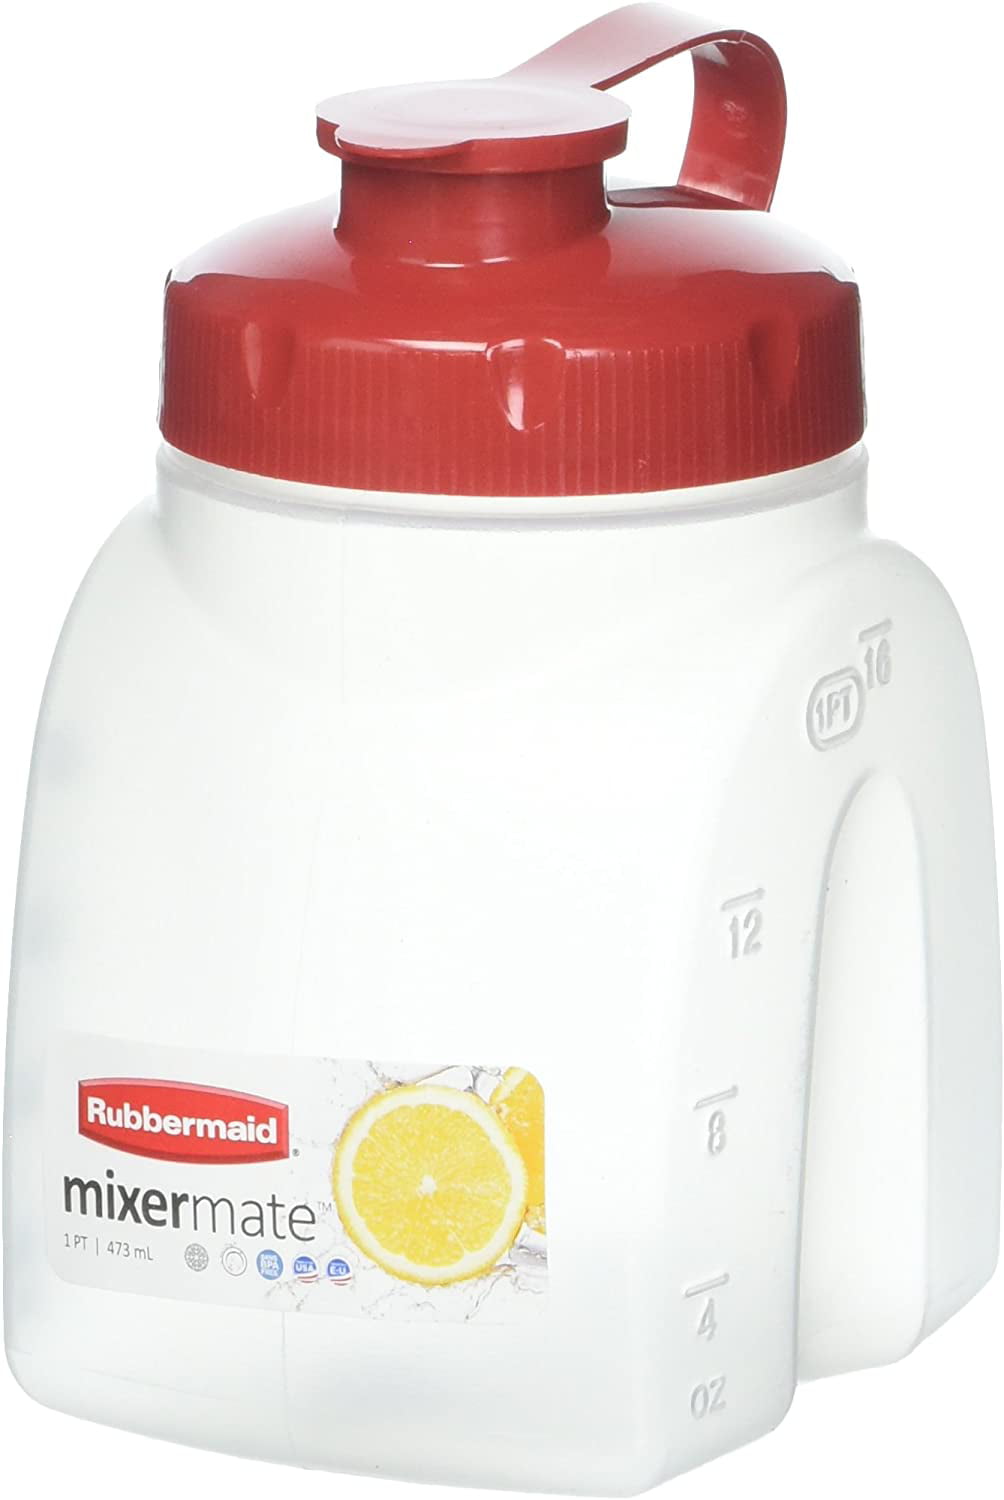 Rubbermaid Servin Saver 2.75 QT drink container with almond flip top lip